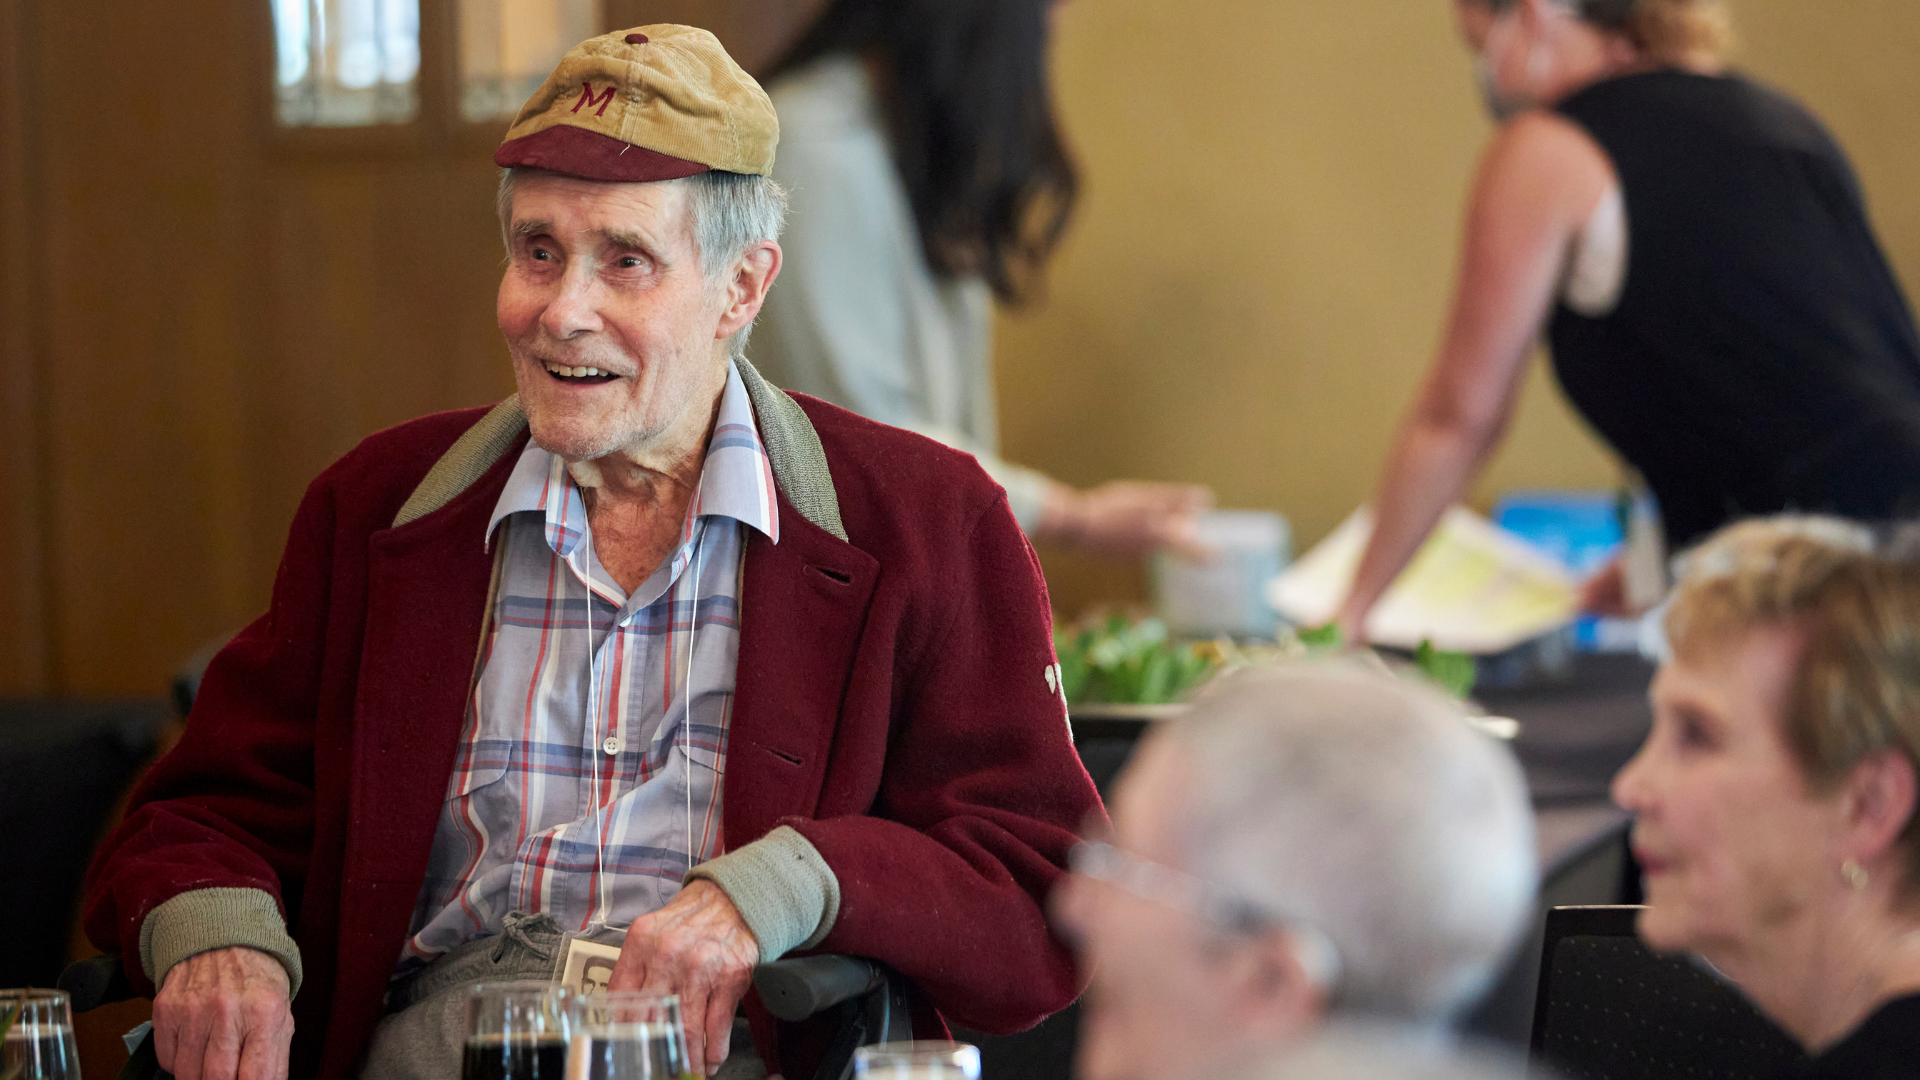 A McMaster graduate wearing a maroon McMaster jacket and maroon and beige hat smiles as he sits listening to speeches during a McMaster alumni luncheon